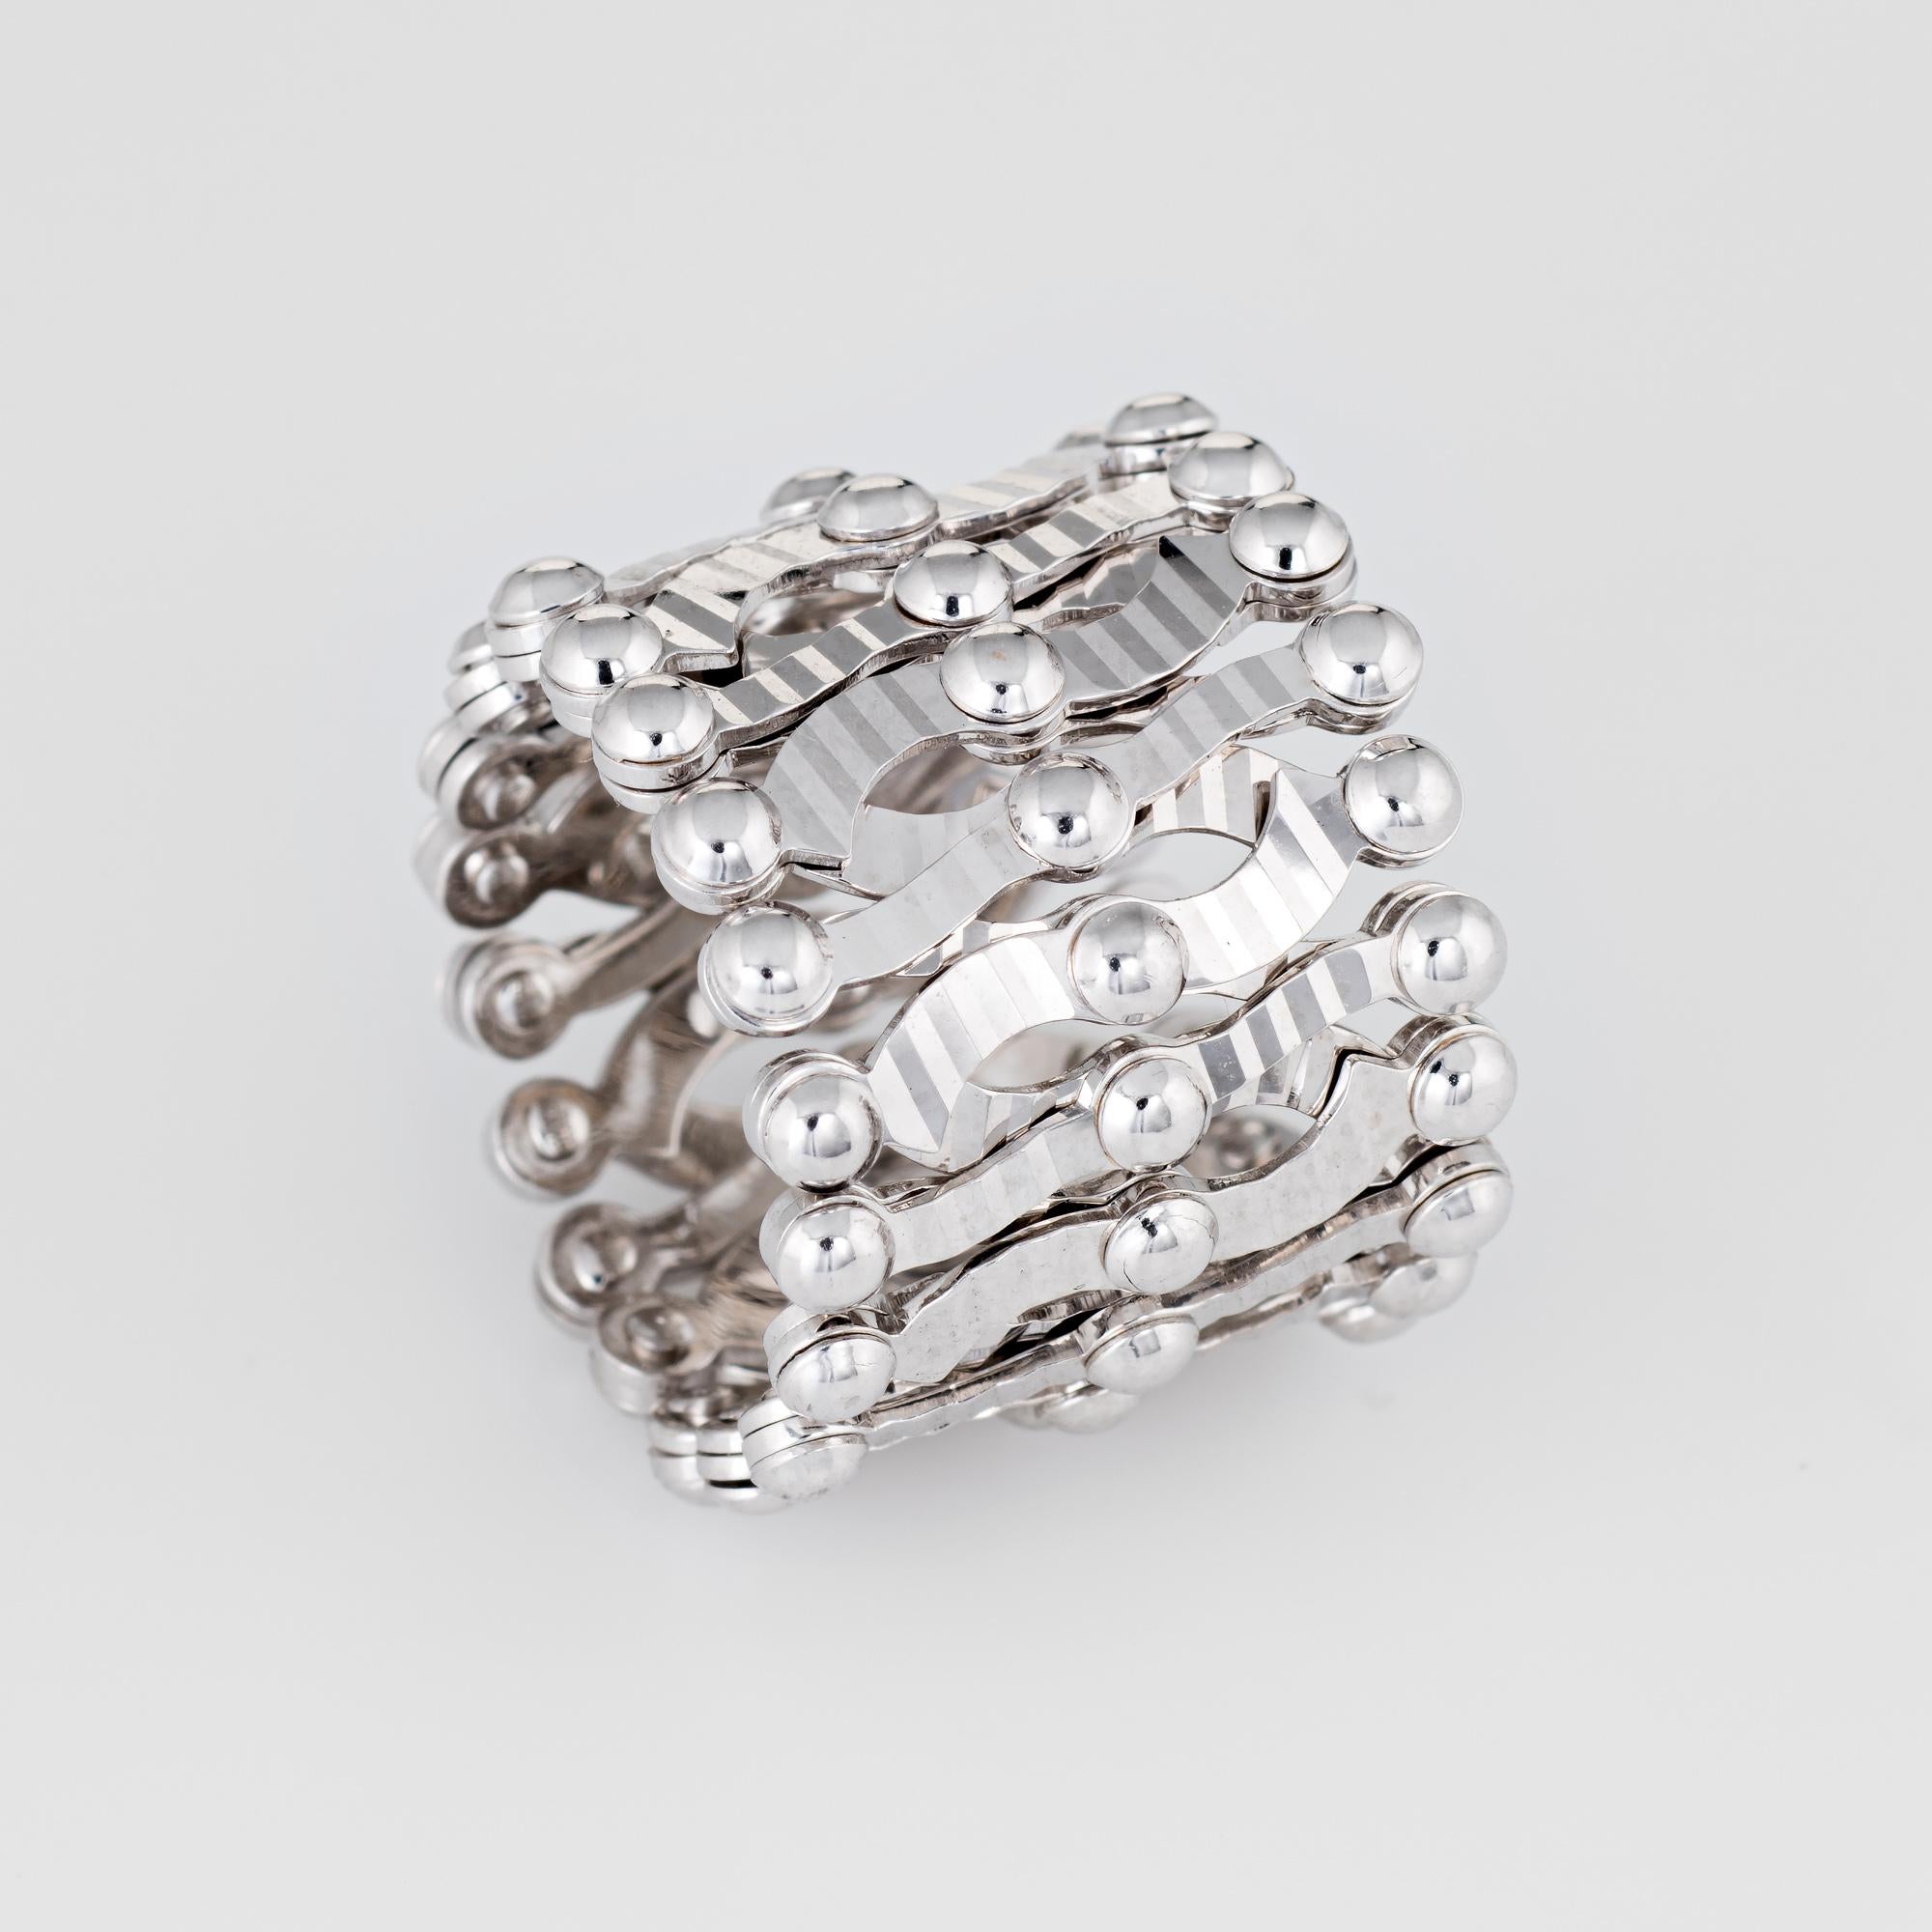 Stylish estate expandable ring to bracelet crafted in 14 karat white gold. 

The ingenious design allows the ring to expand and contract to fit just about any size finger and wrist. The textured lattice work design allows for endless accessorizing